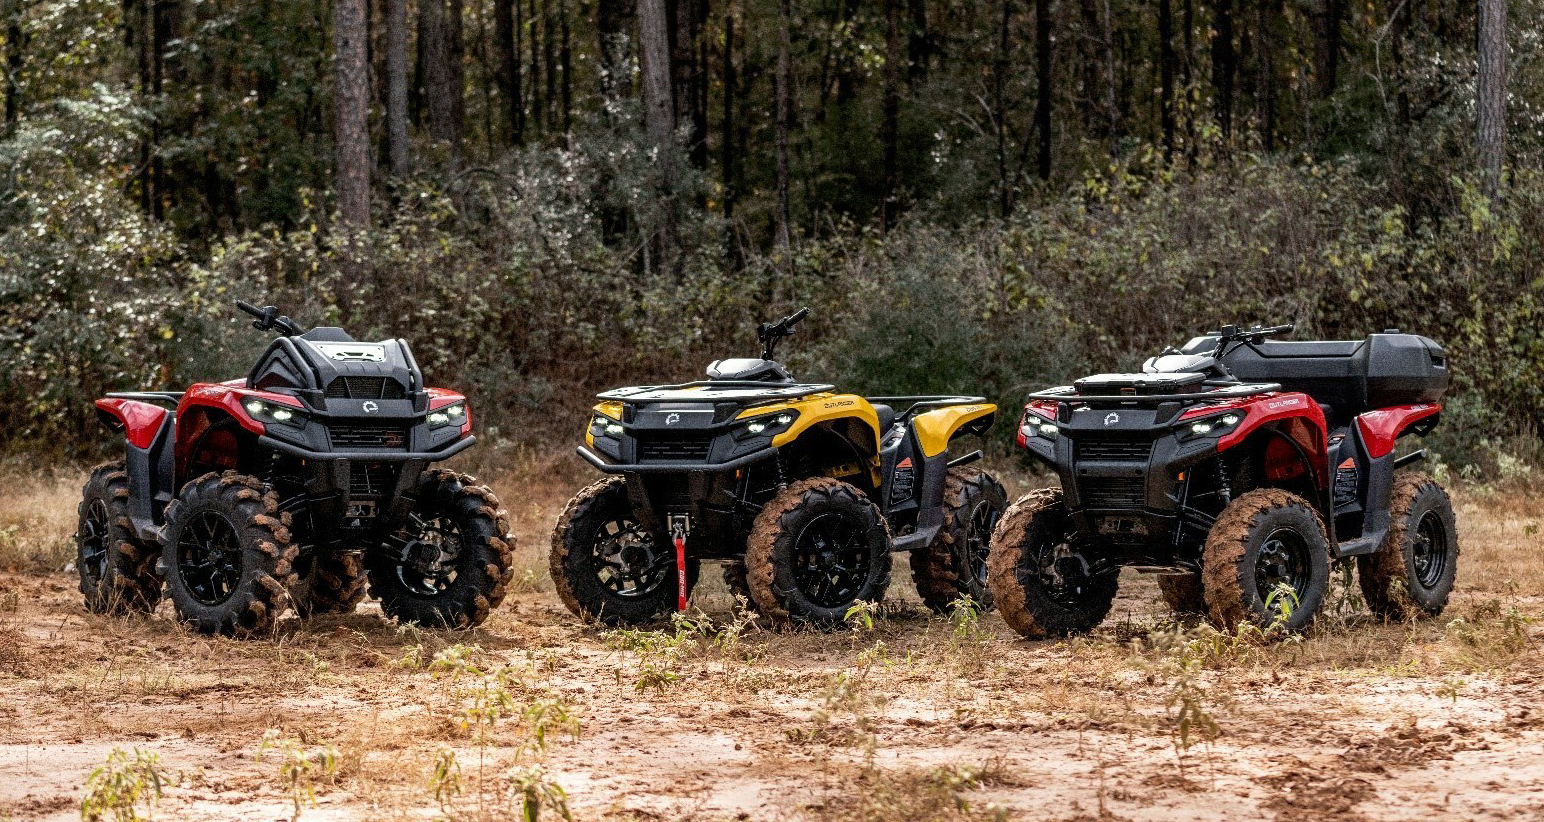 BRP releases new Can-Am Outlander models